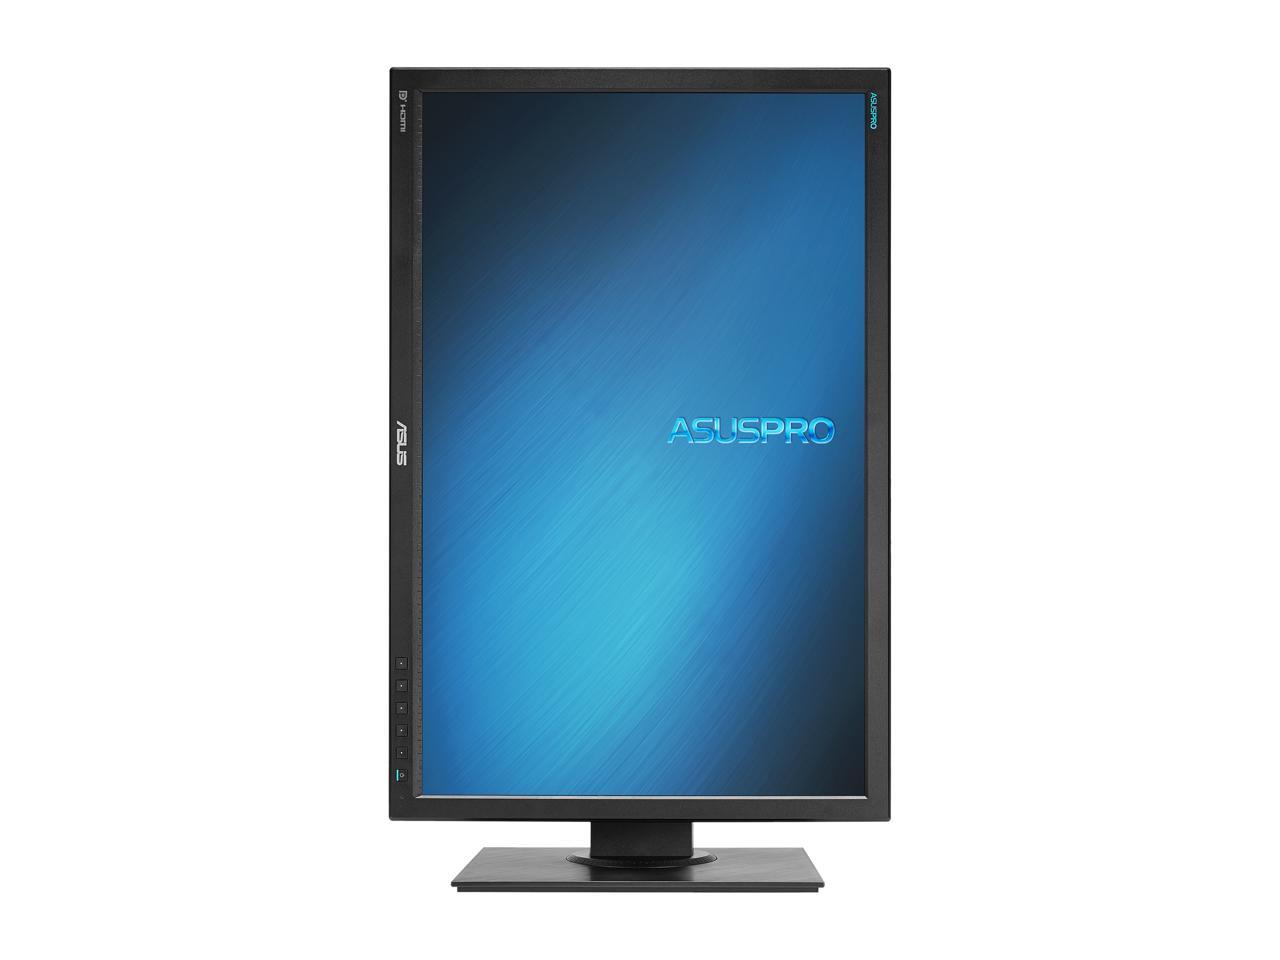 ASUS C624BQH Business Monitor - 24 inch (24.1 inch viewable) 16:10 (1920x1200), IPS, Mini-PC Mount Kit, Flicker free, Low Blue Light, Ergonomic Stand, HDMI